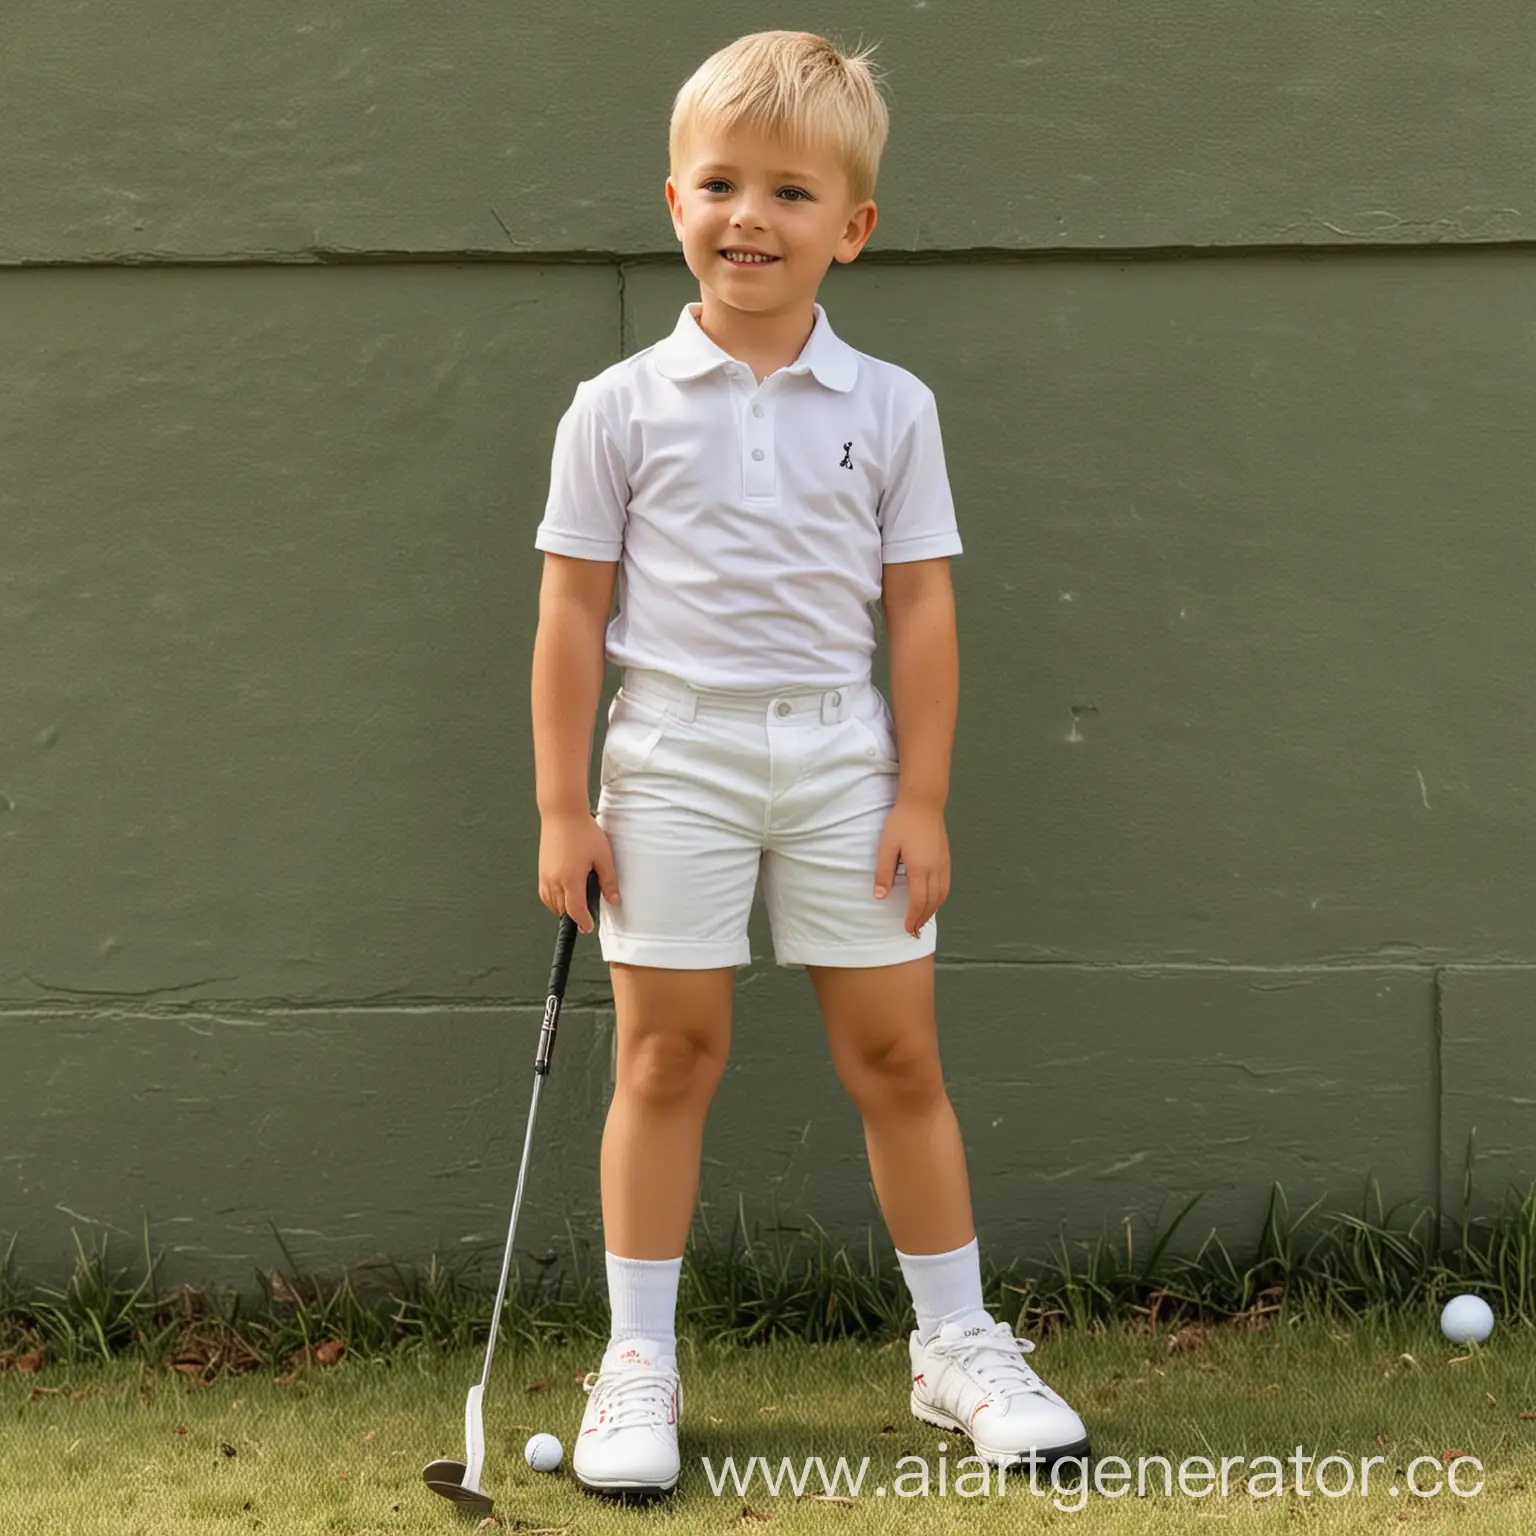 Young-Boy-in-Short-Shorts-and-White-Kneelength-Golf-Pants